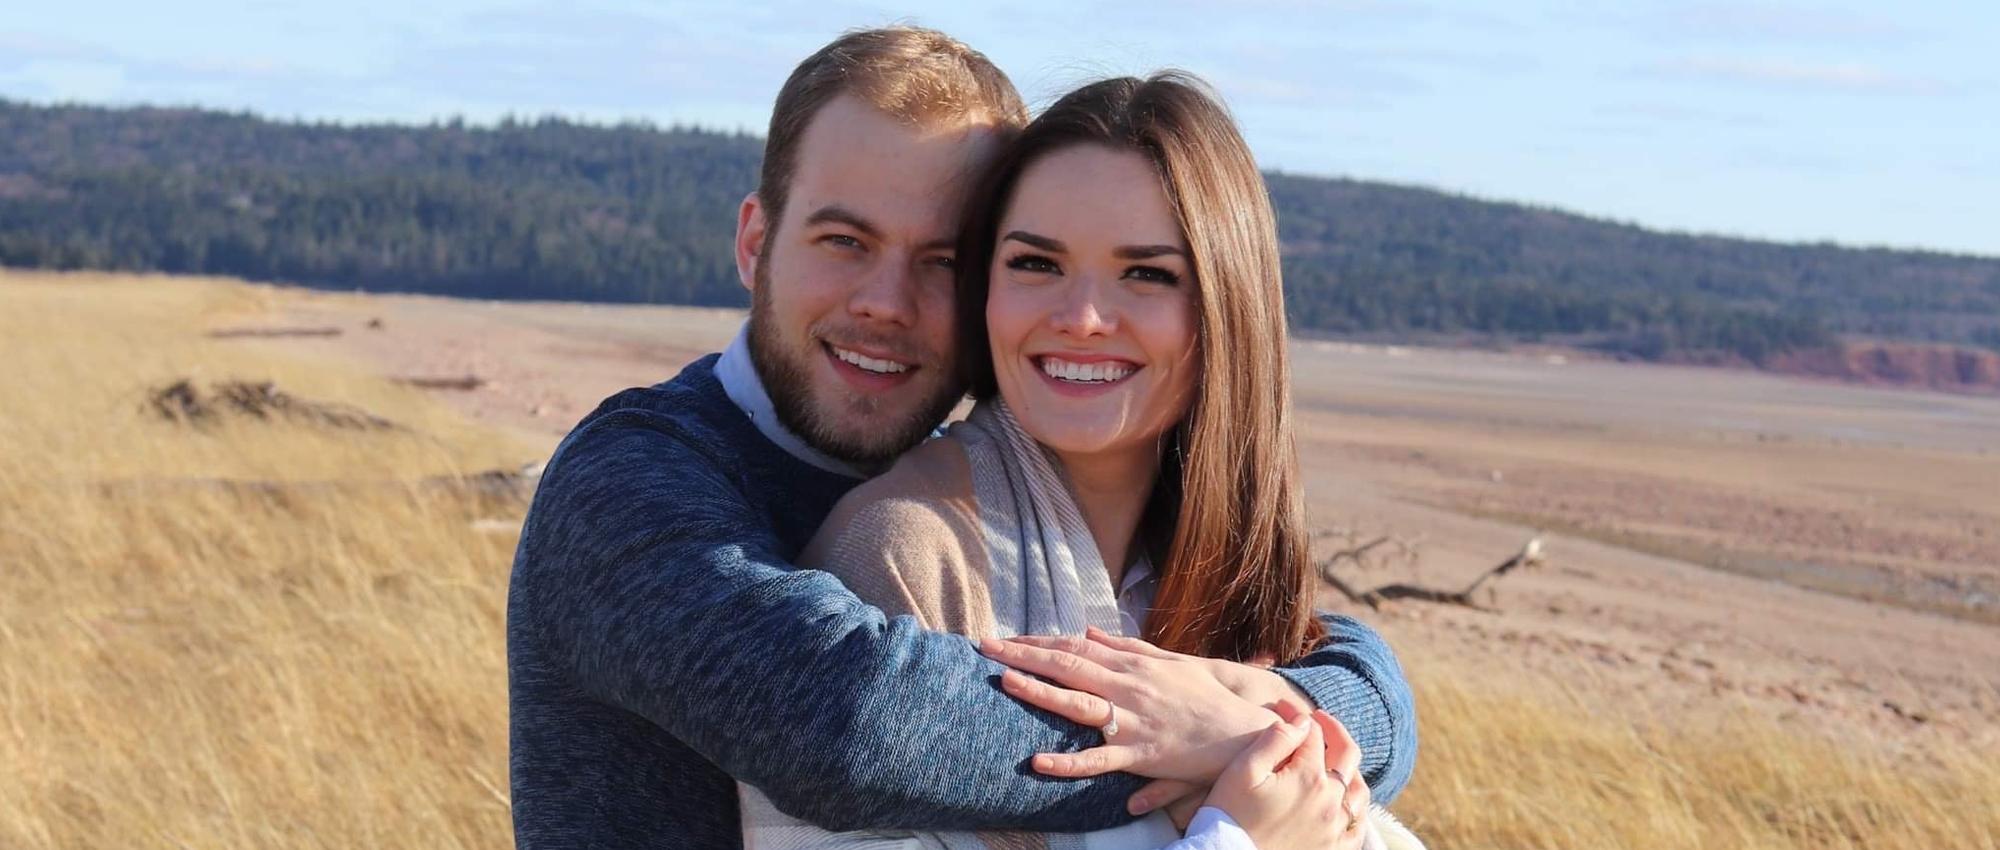 Lizzy Burns and her fiancé Ryan Doucet stand together in a field of yellow grasses. Lizzy Burns successfully donated stem cells in December 2020.